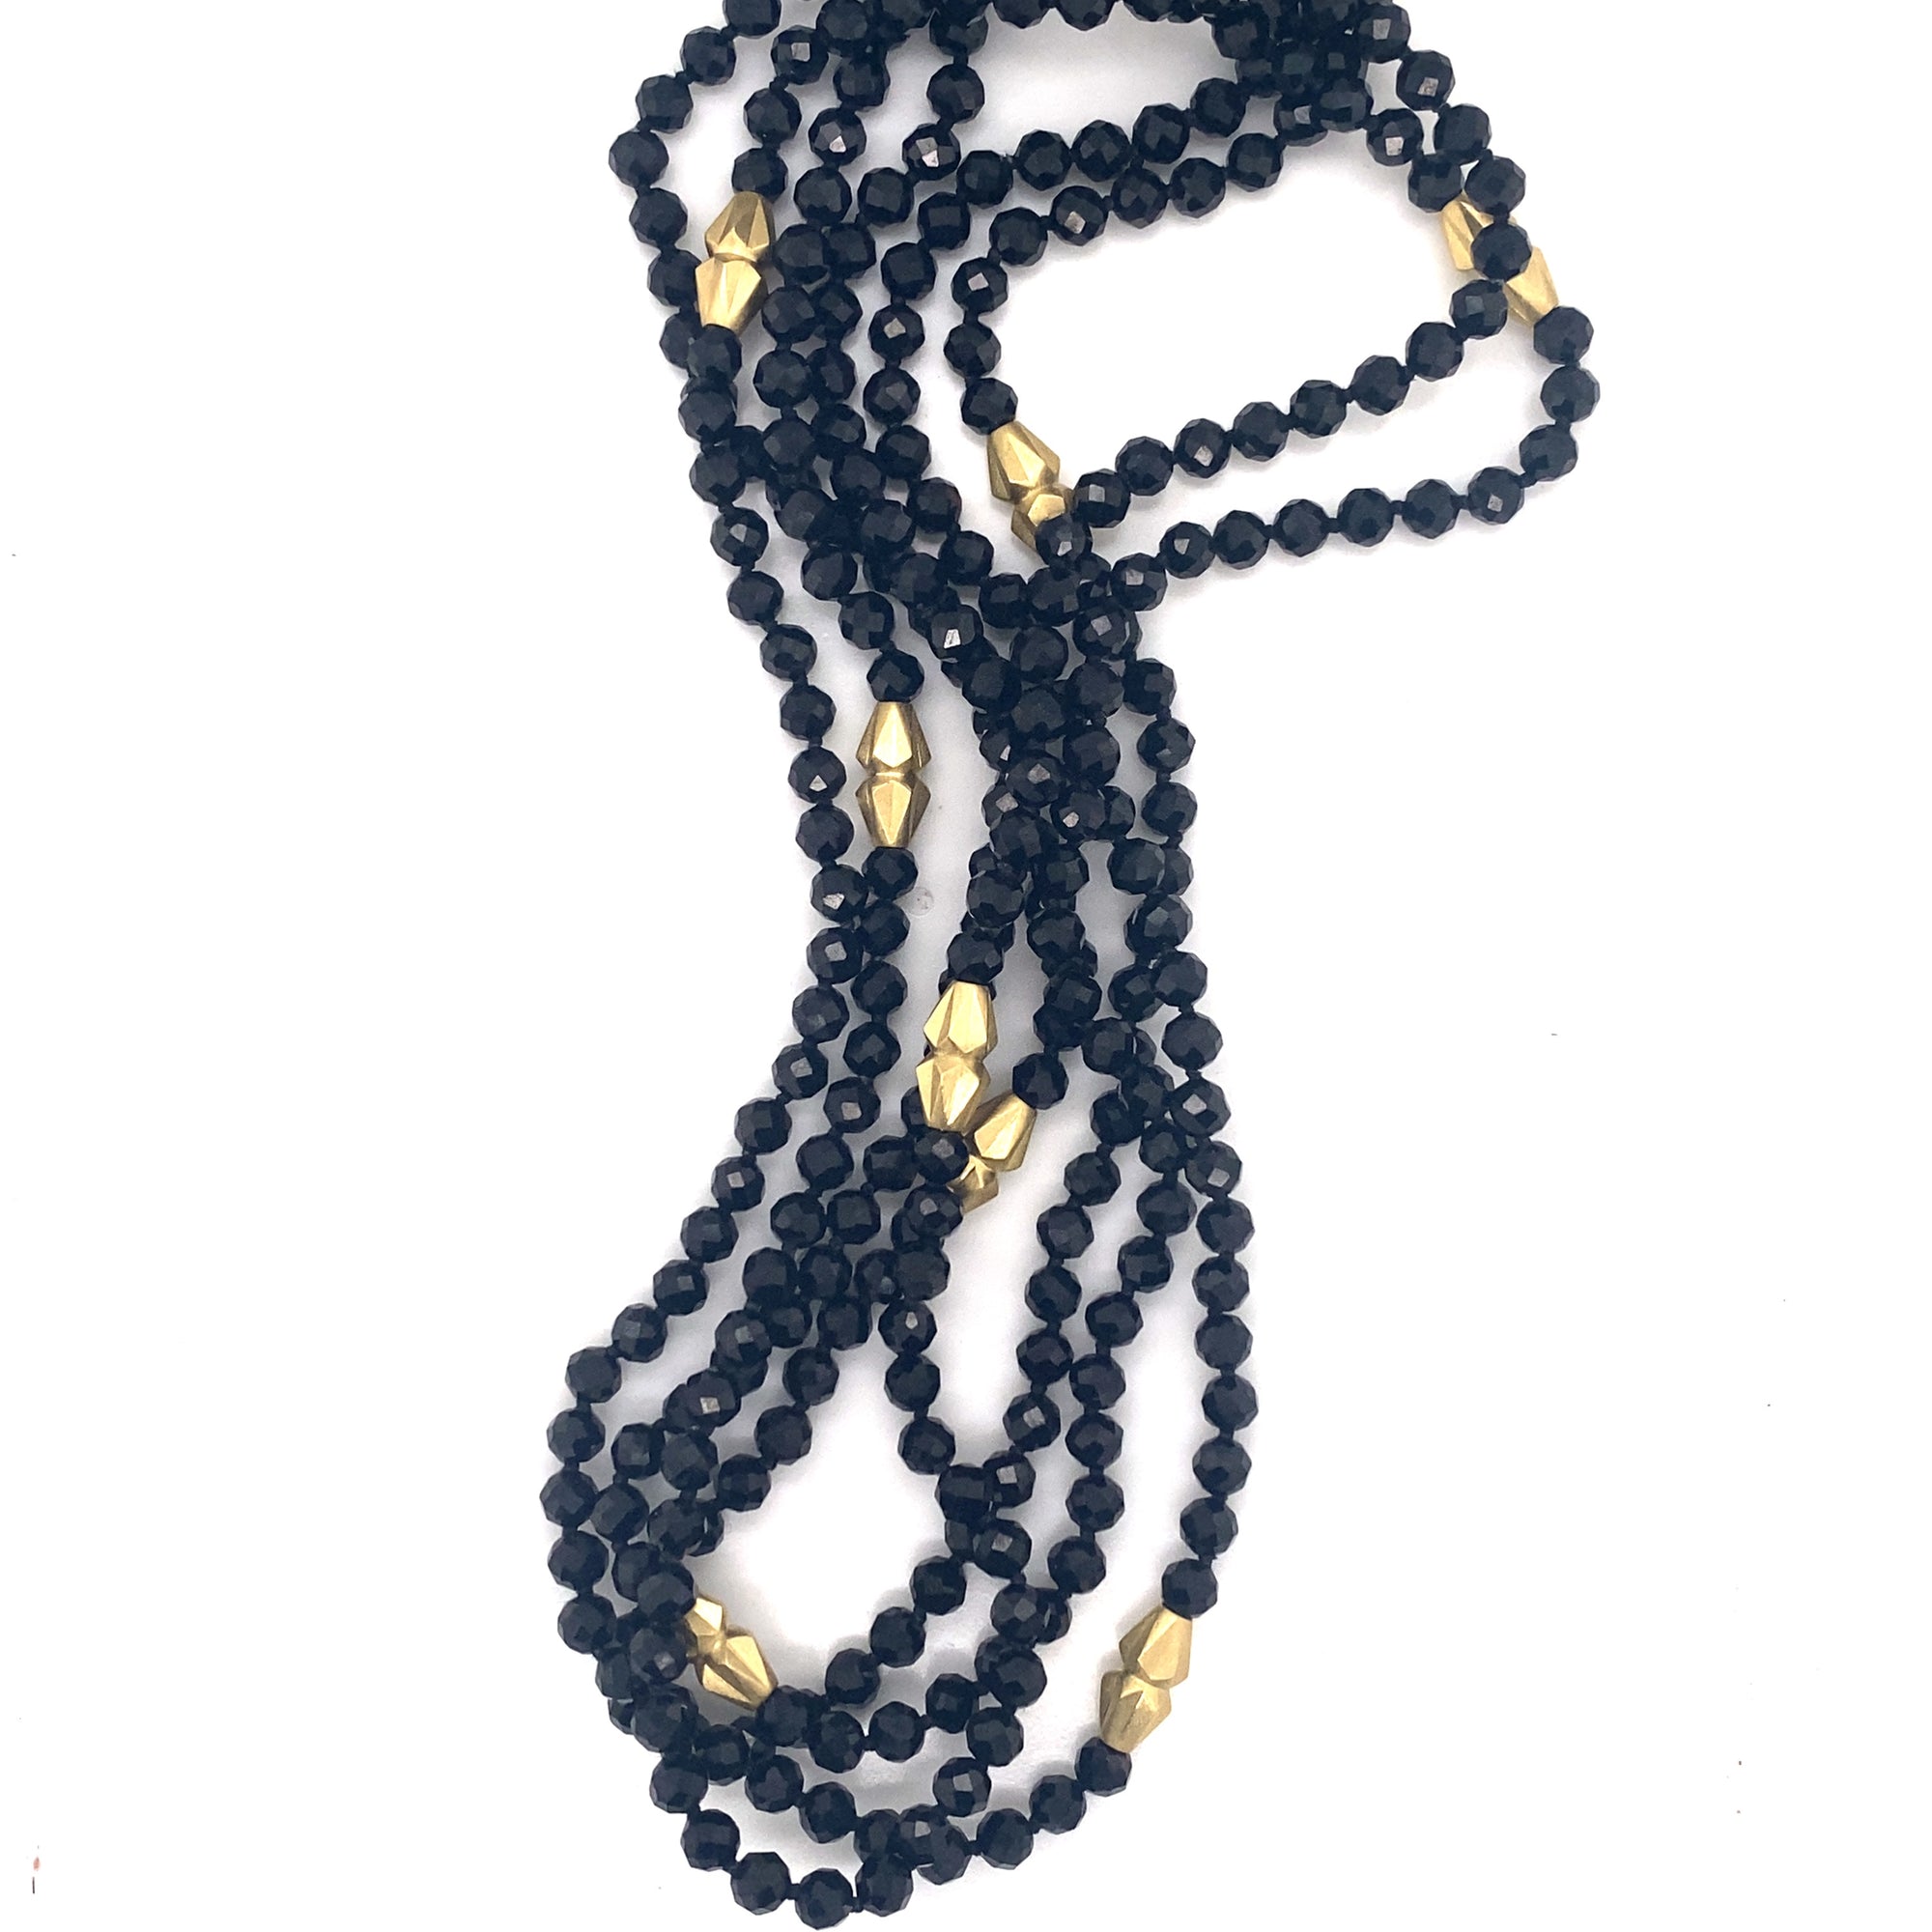 Black Spinel, Gold beaded necklace